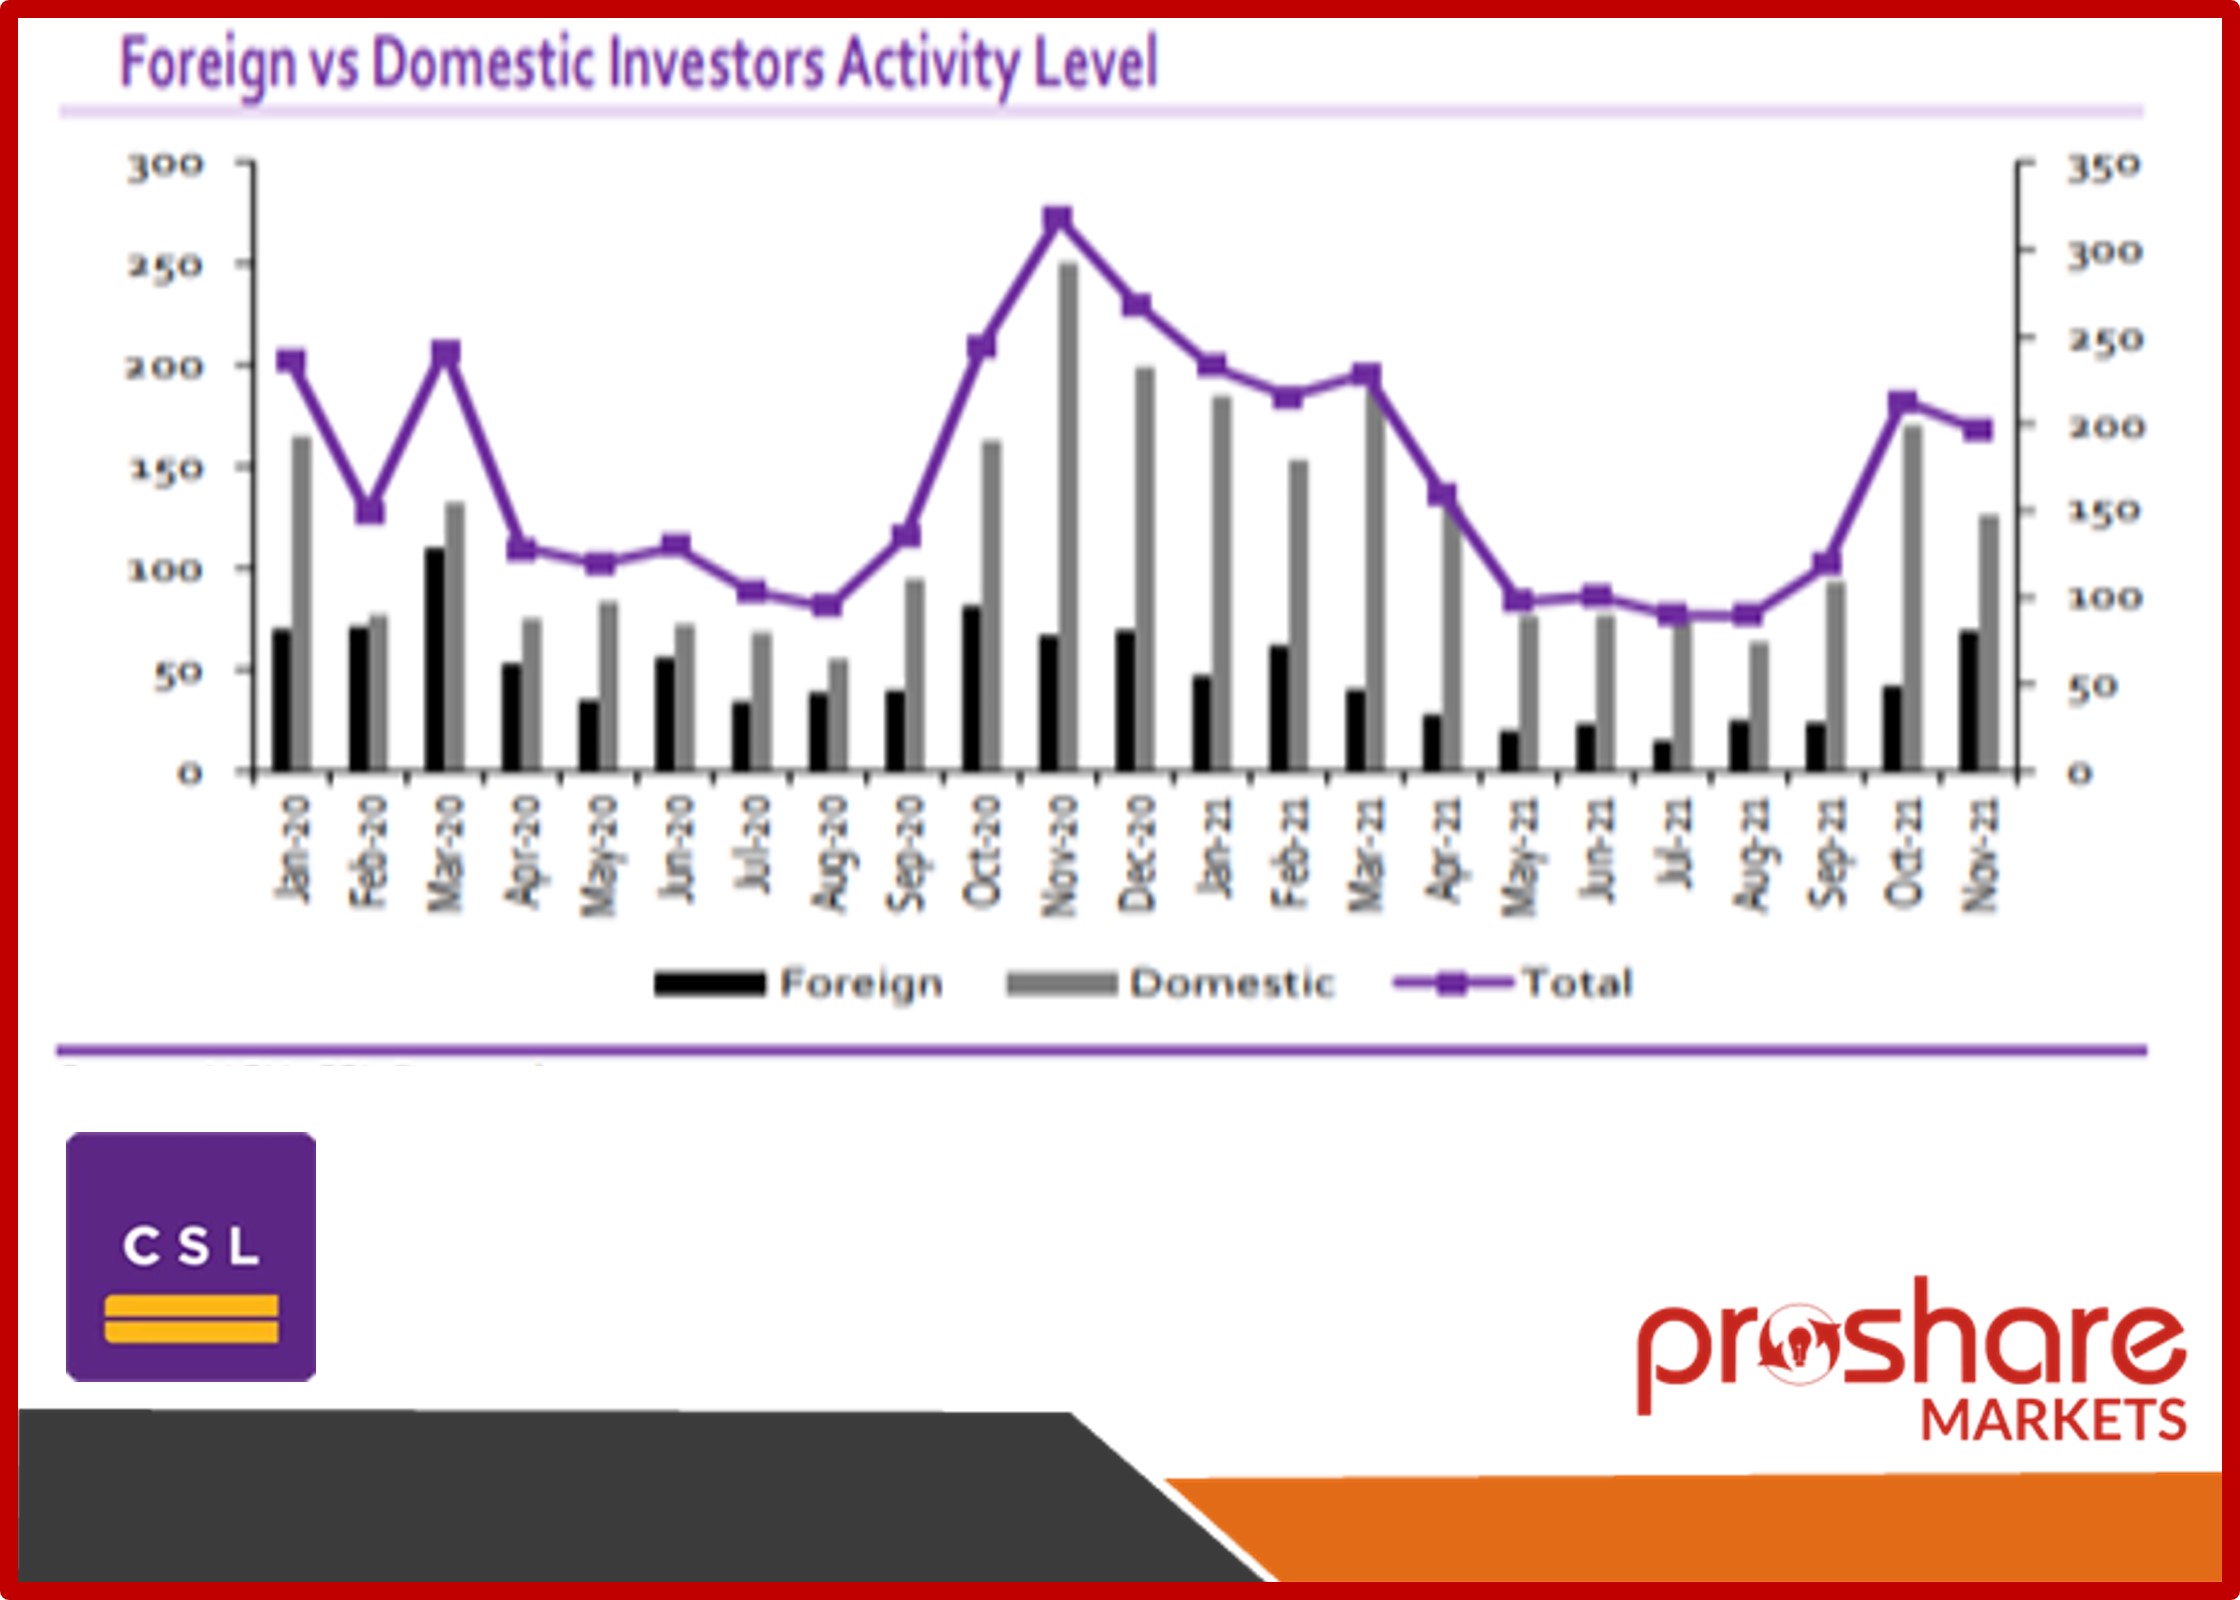 Reduced Domestic Investor Participation Drags Total Activity Level in November 2021